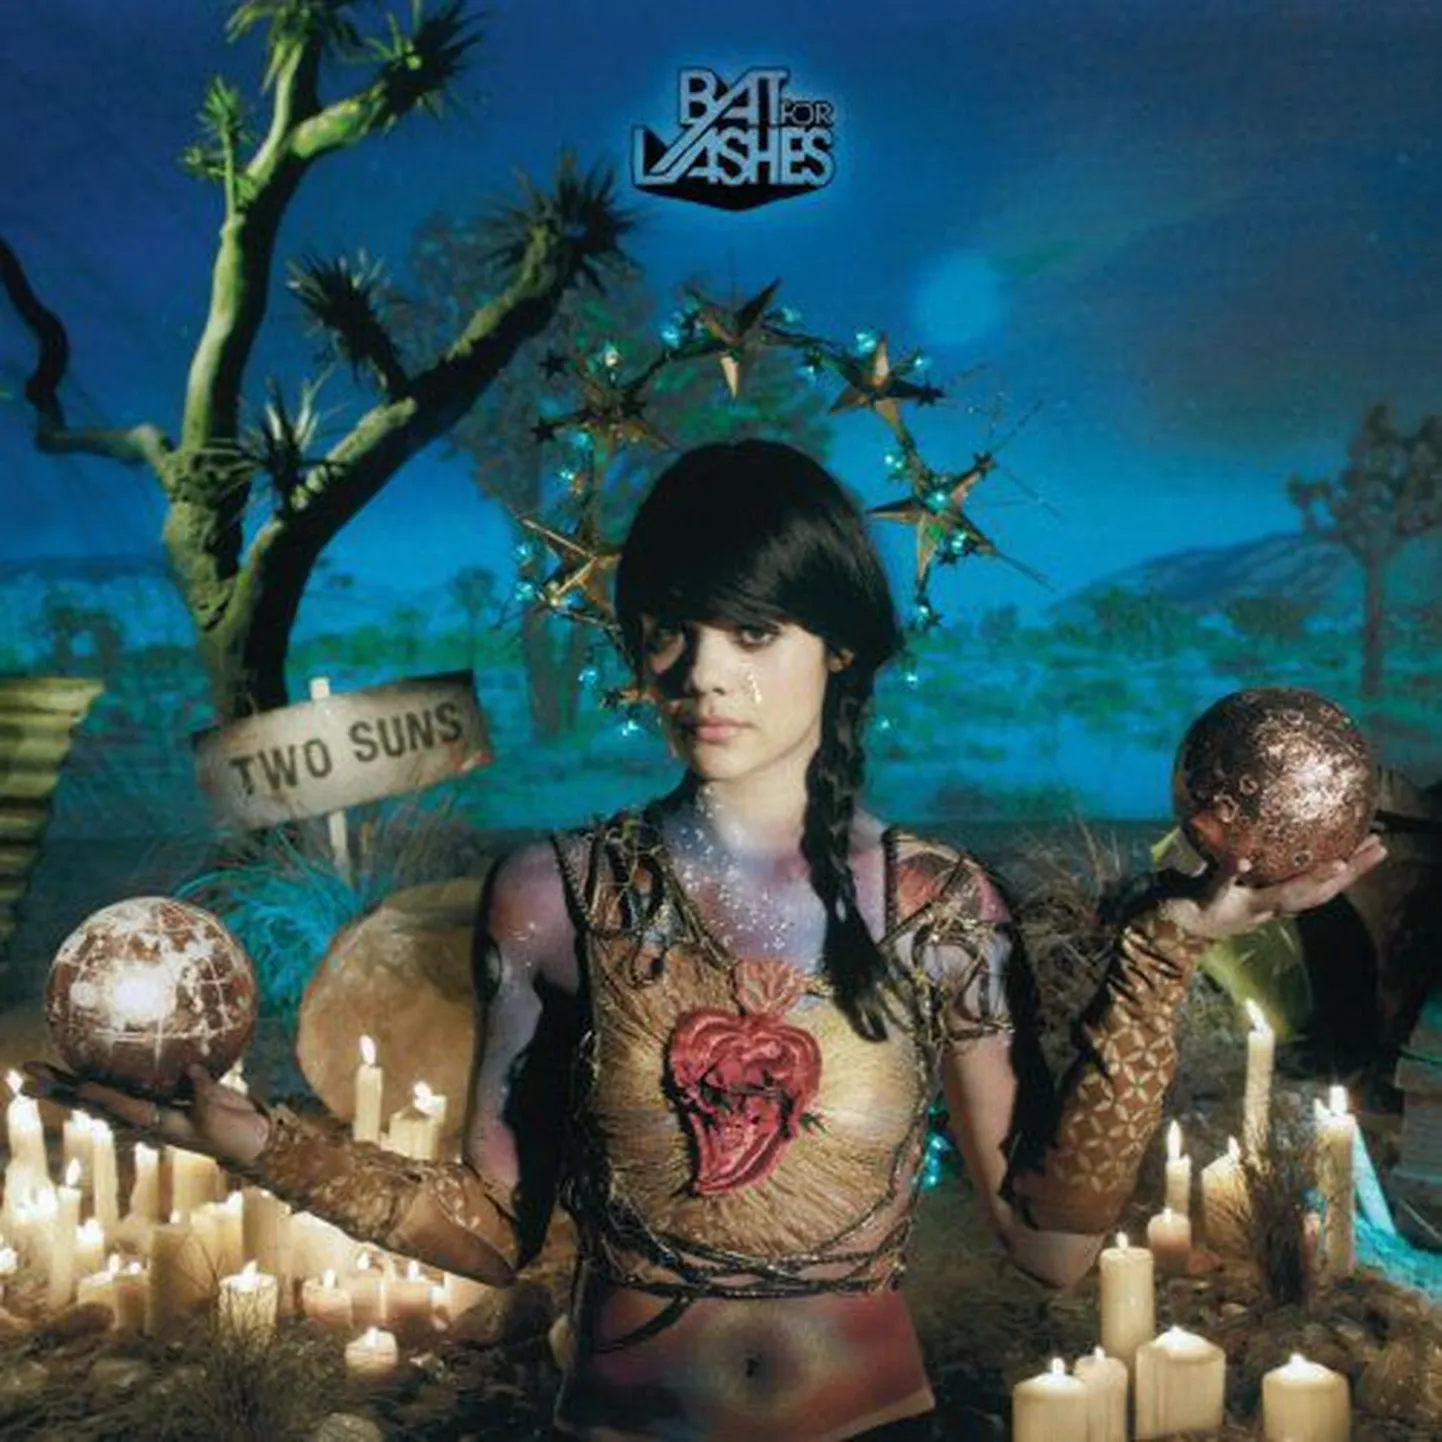 Bat For Lashes "Two Suns".